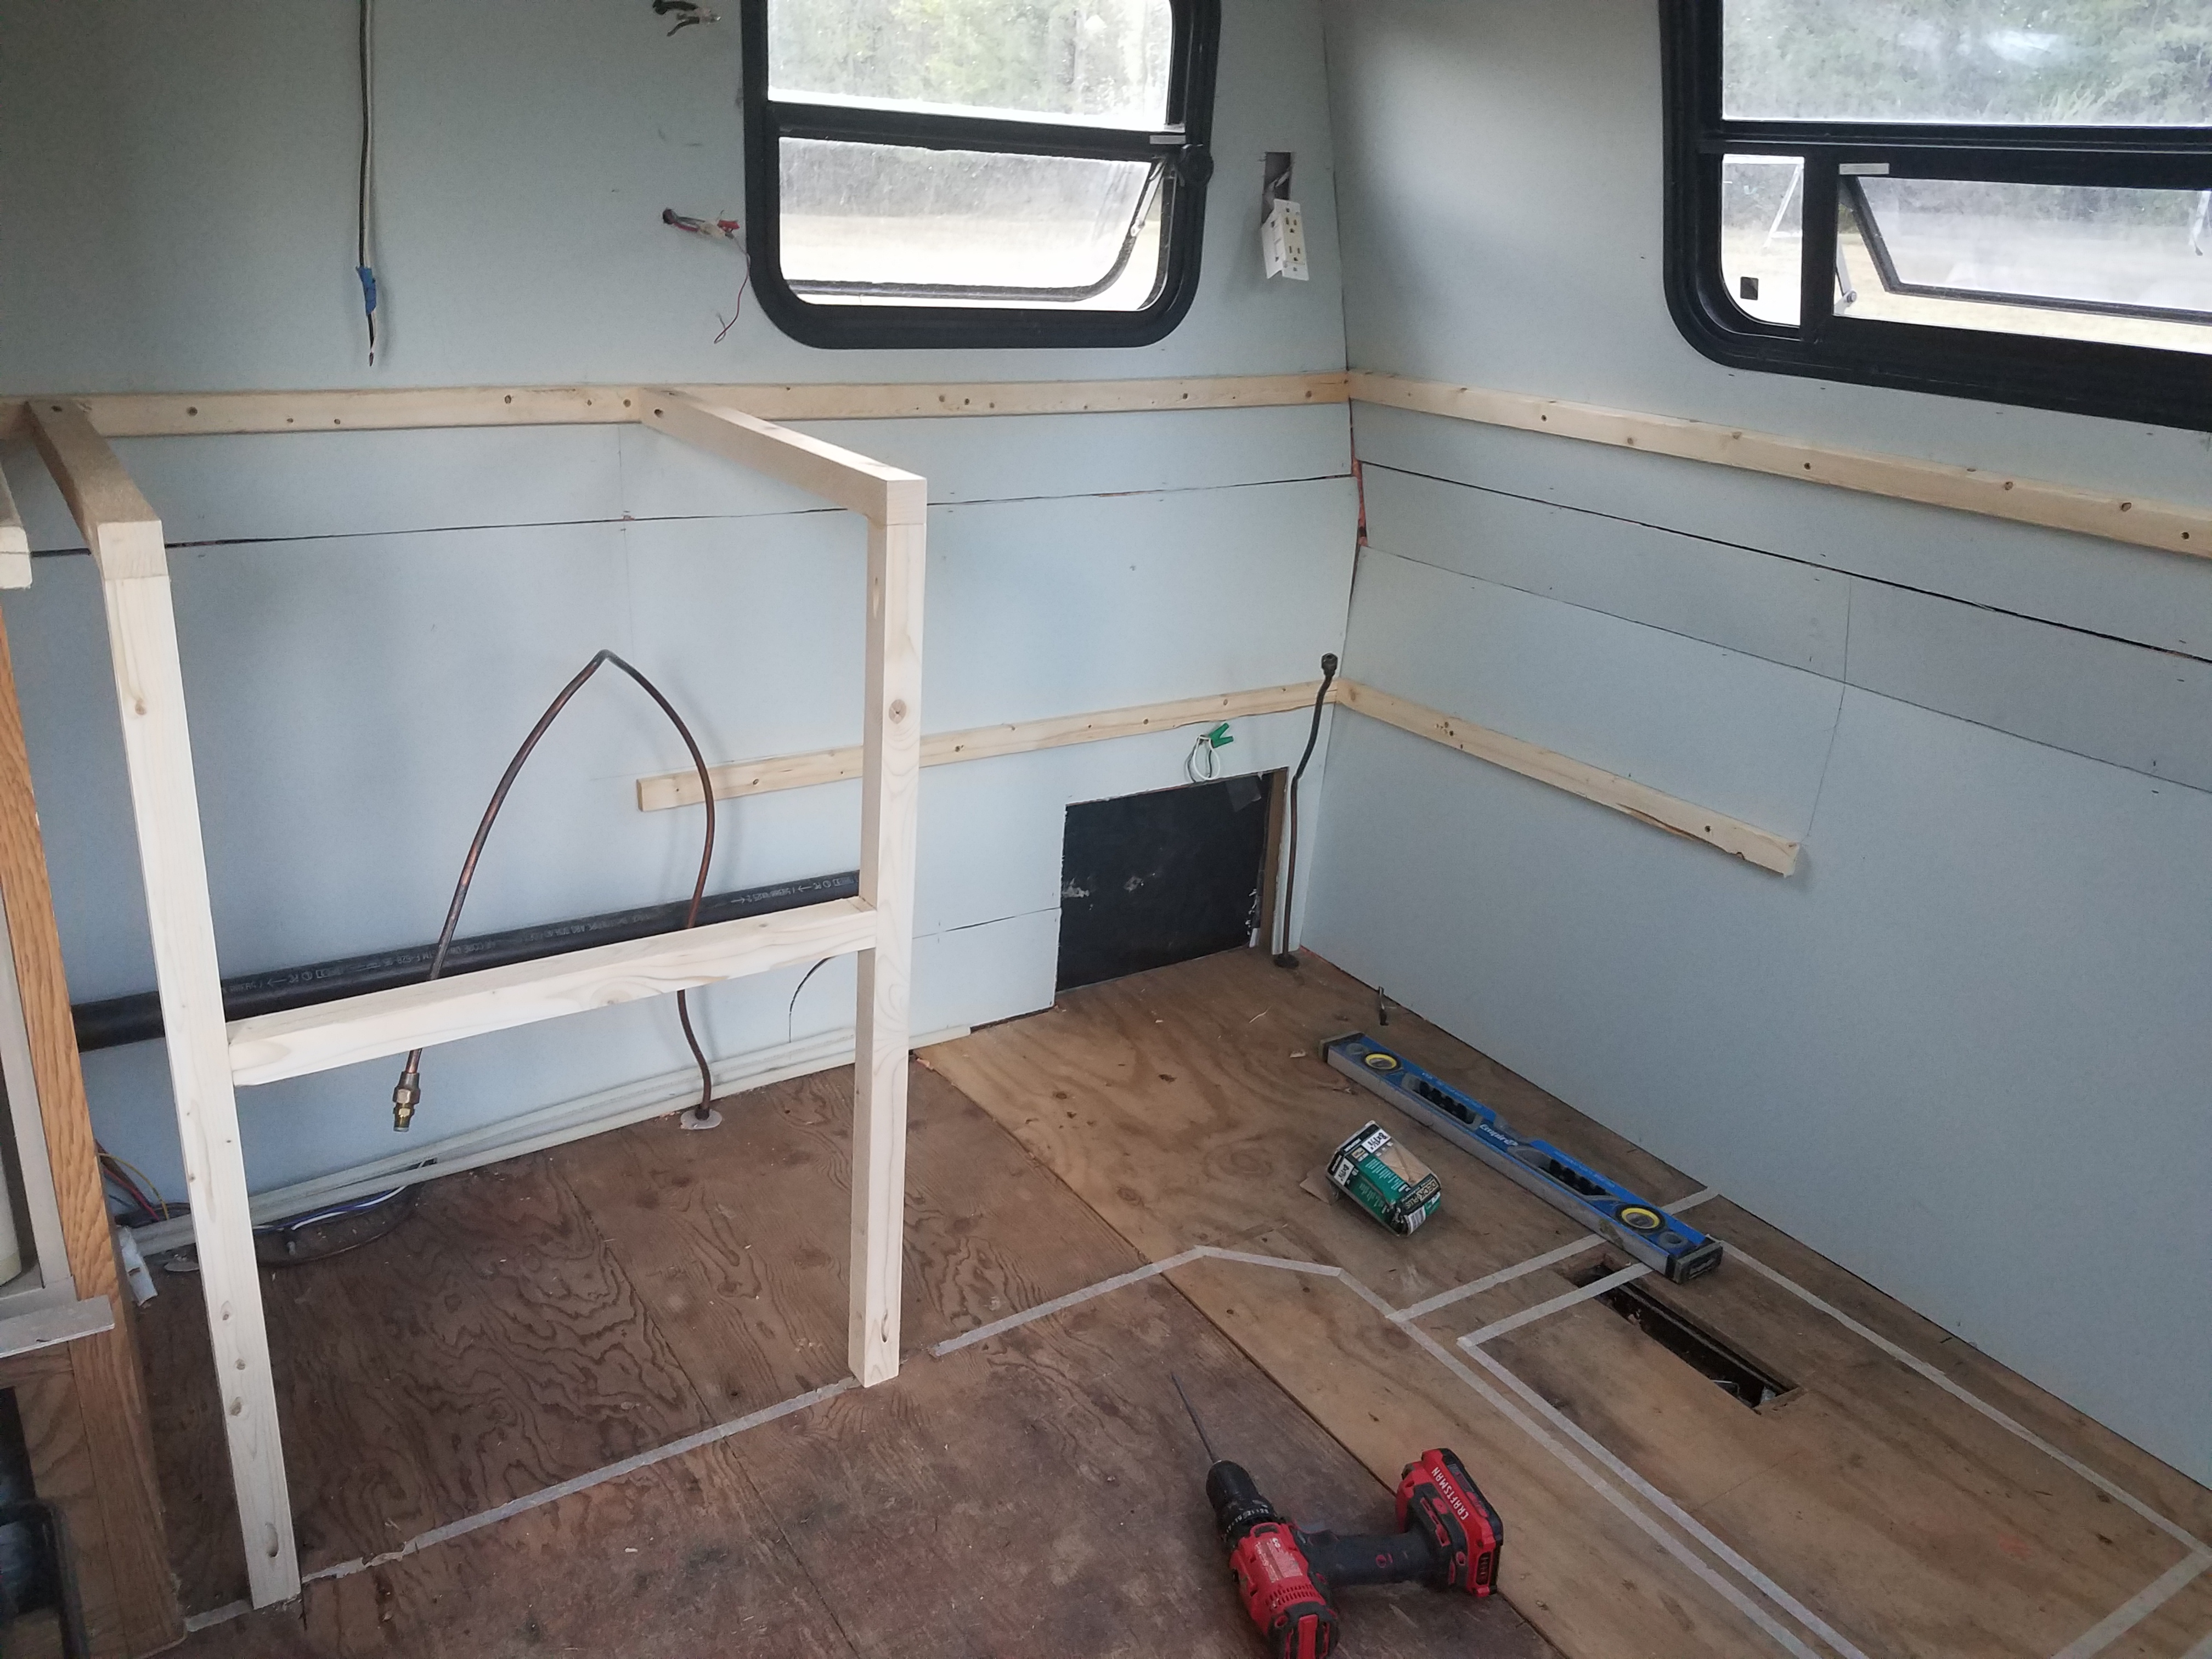 The frame of the stove in the kitchen of the travel trailer.